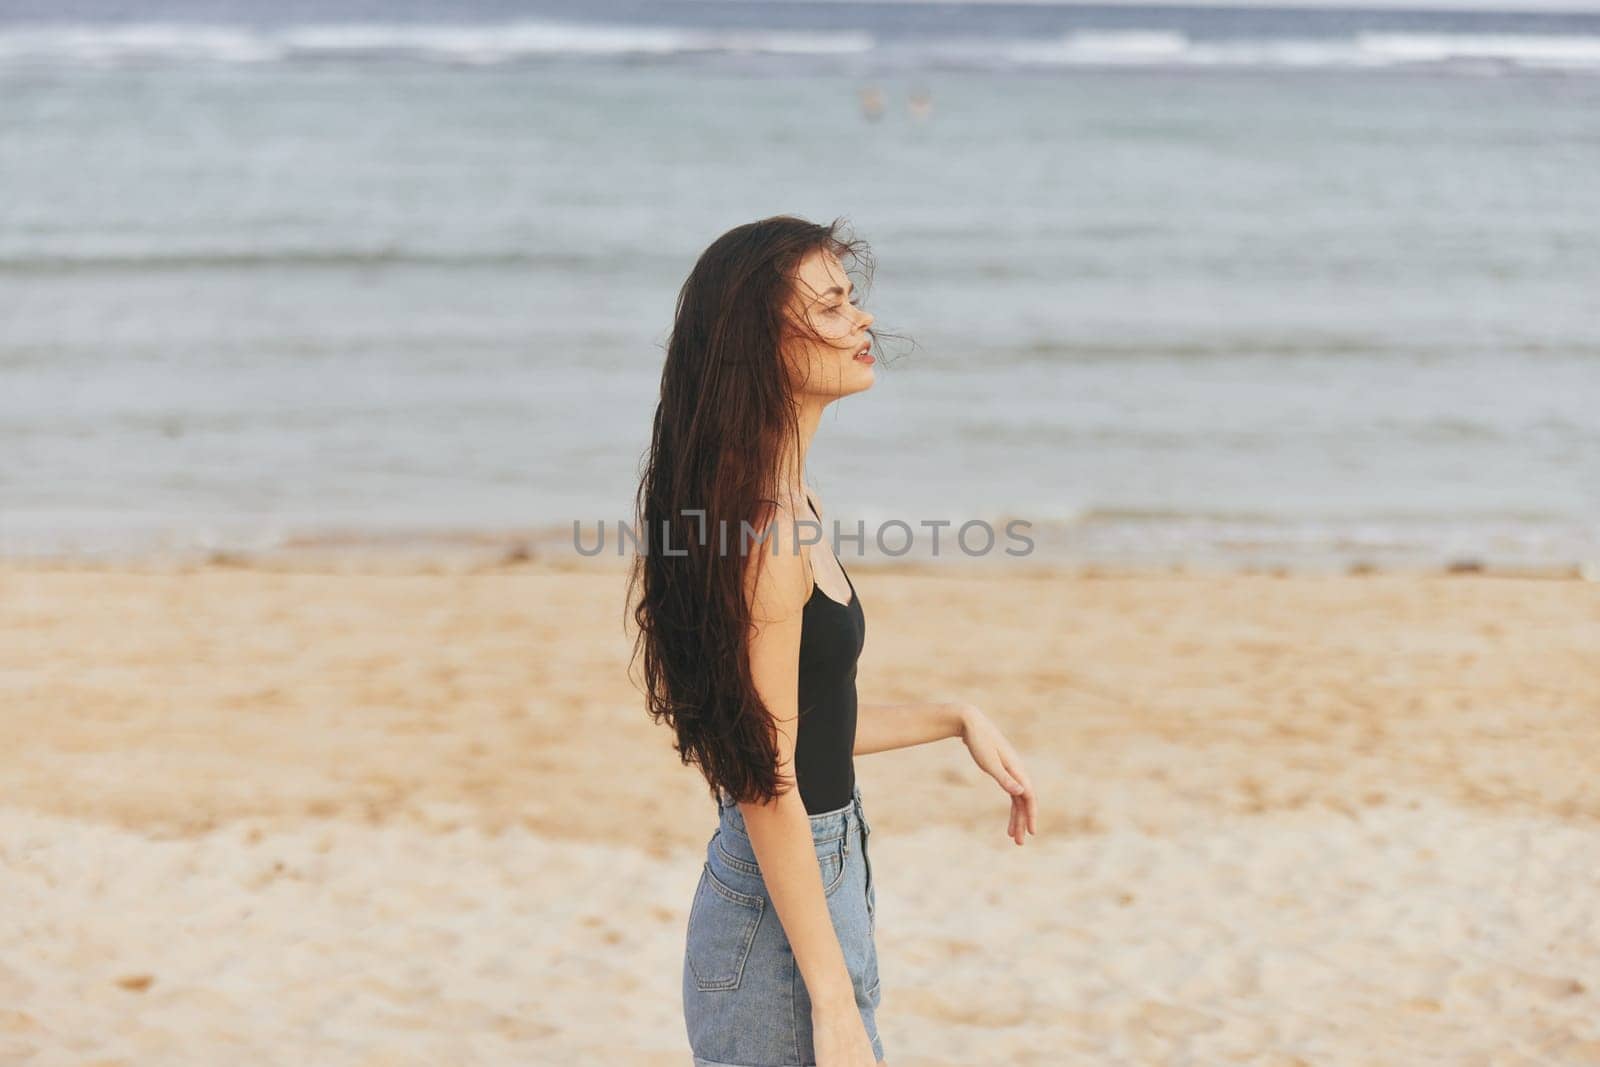 woman sand leisure sea travel sun water summer beautiful adult lifestyle space sunset beauty vacation smile smiling caucasian freedom copy ocean beach